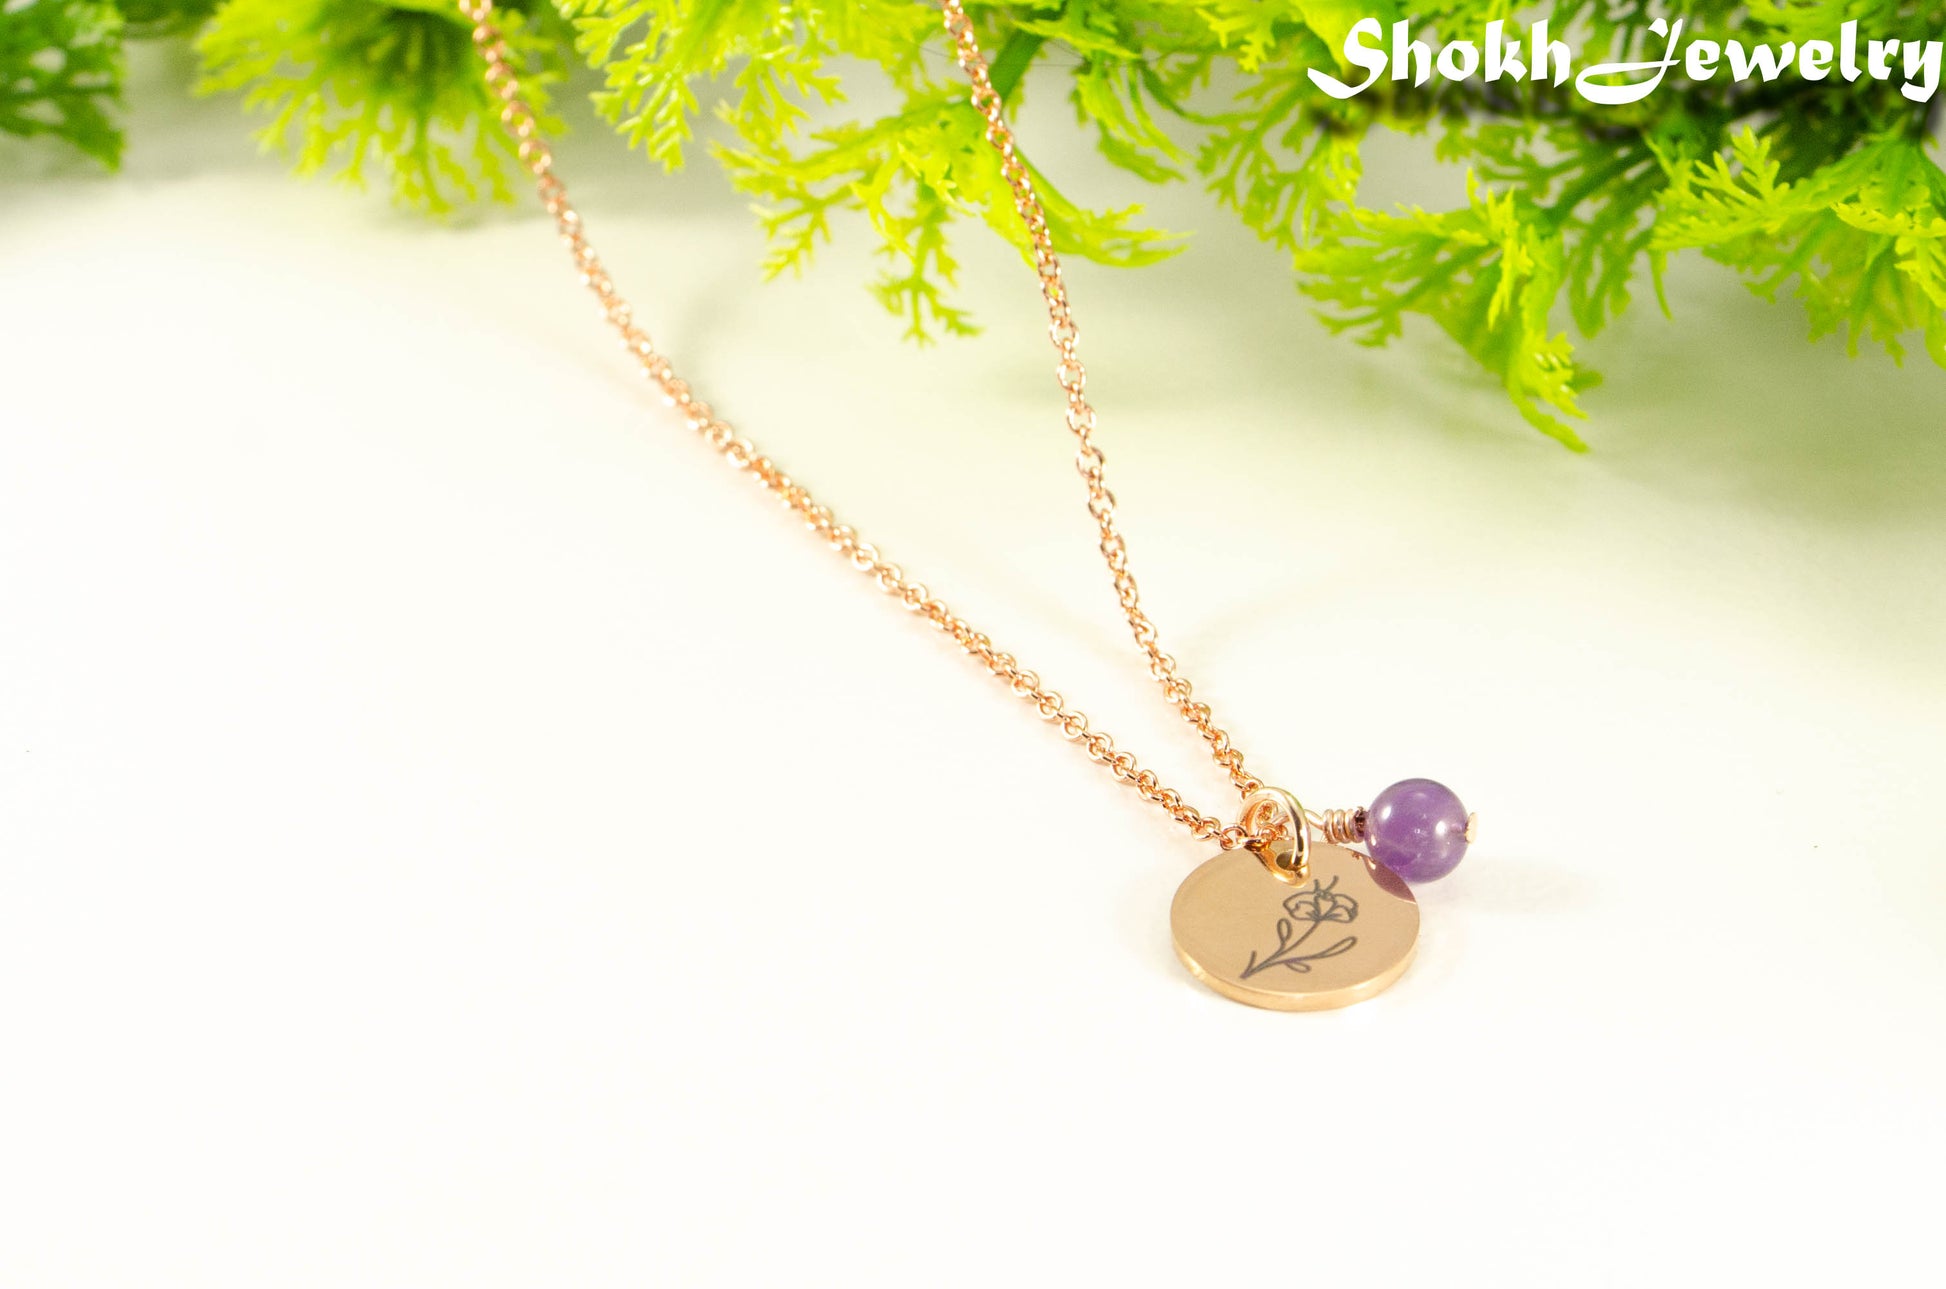 Close up of Rose Gold Plated February Birth Flower Necklace with Amethyst Birthstone Pendant.